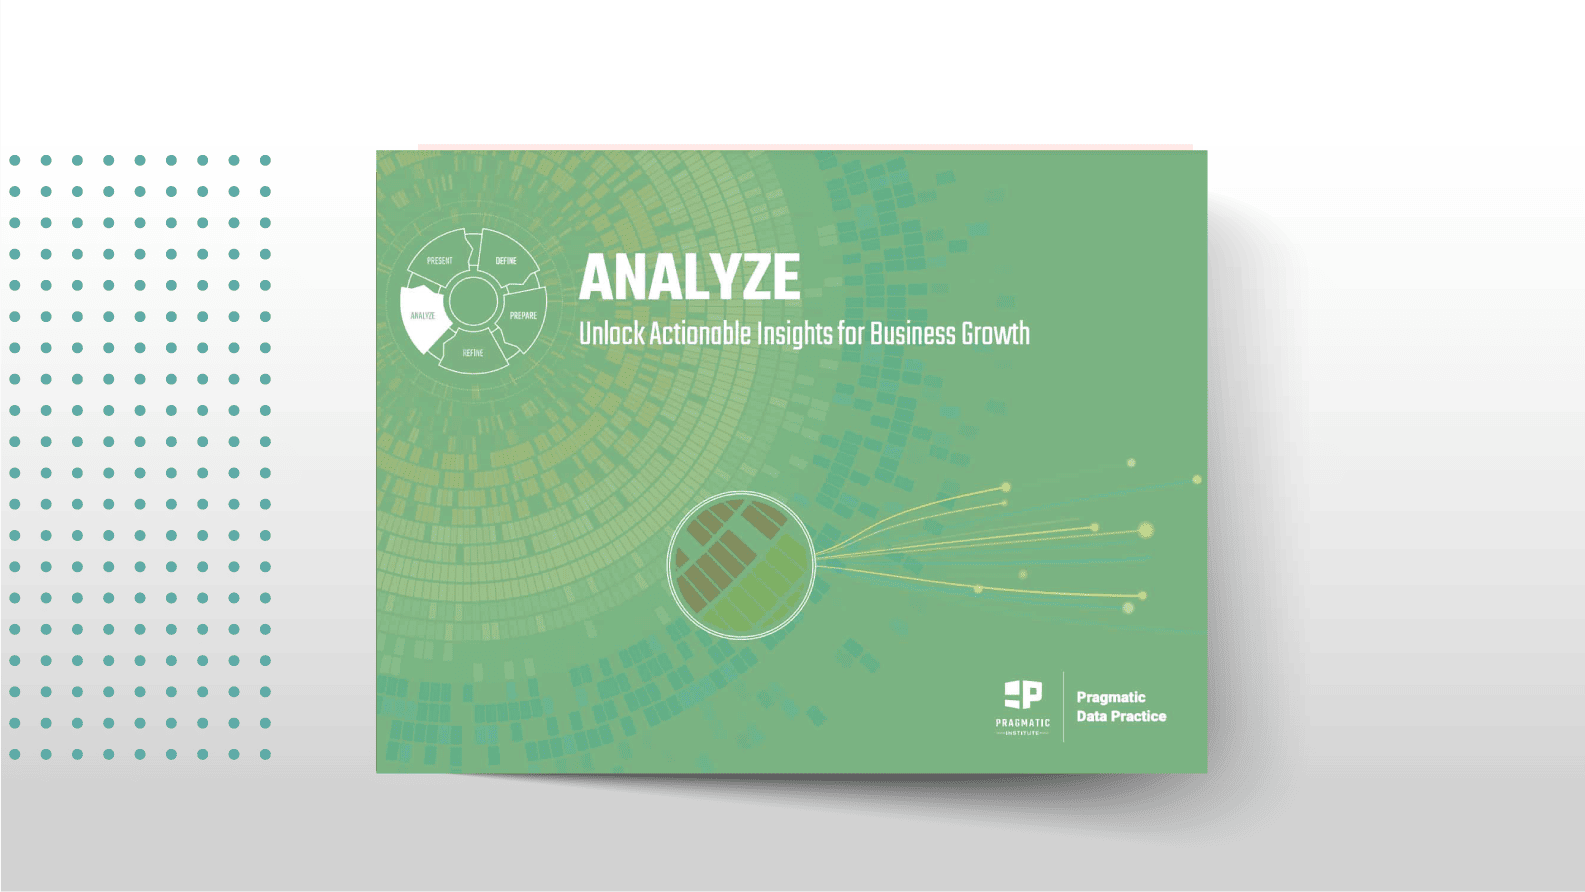 Analyze: Unlock Actionable Insights for Business Growth